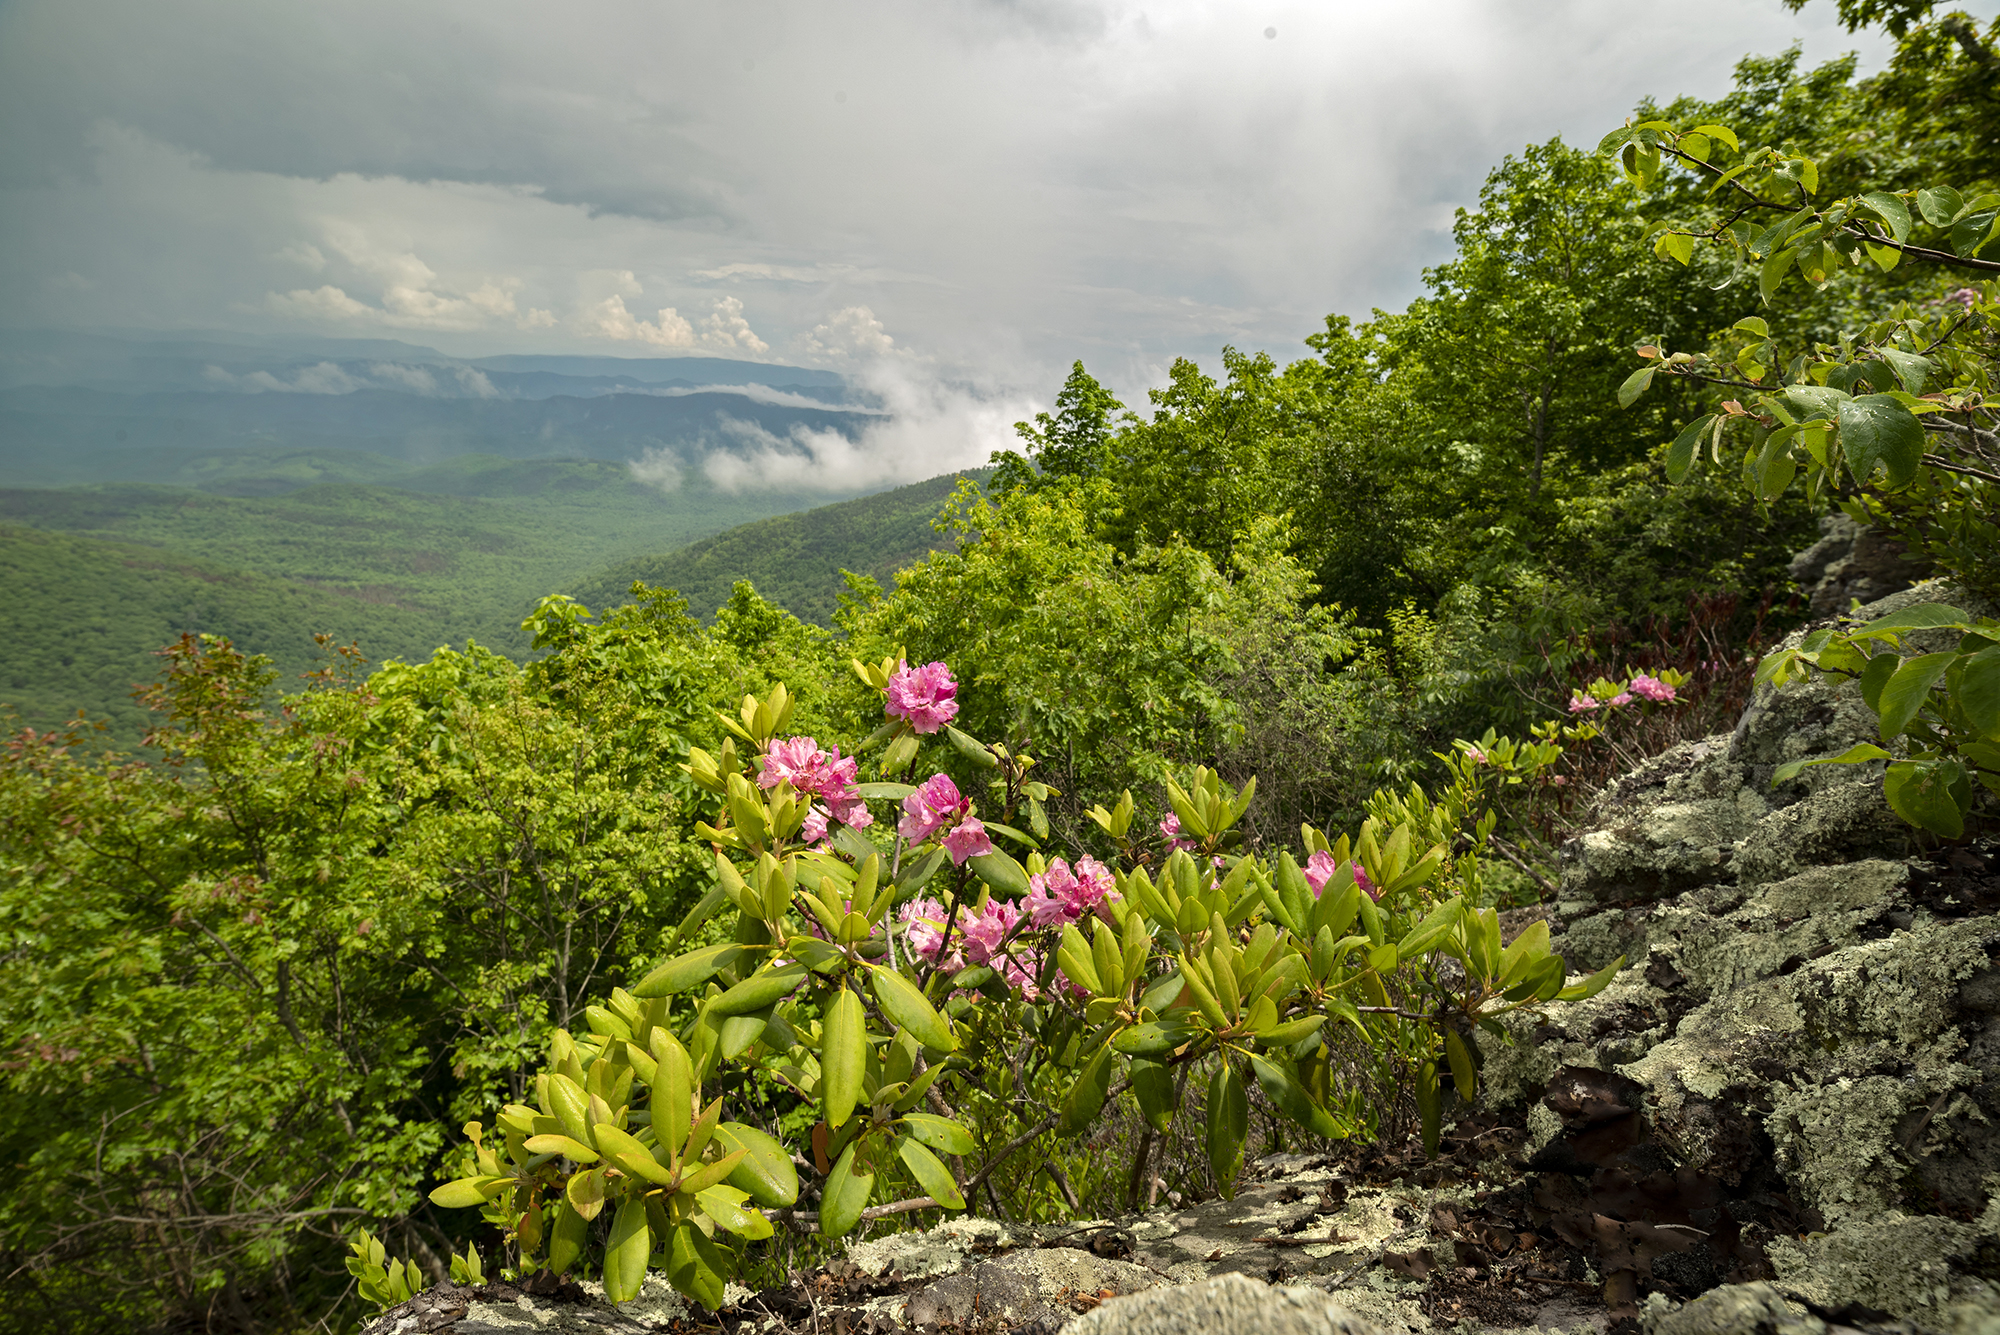 Pink flowers grow in a rocky outcropping looking out over a cloud filled valley.